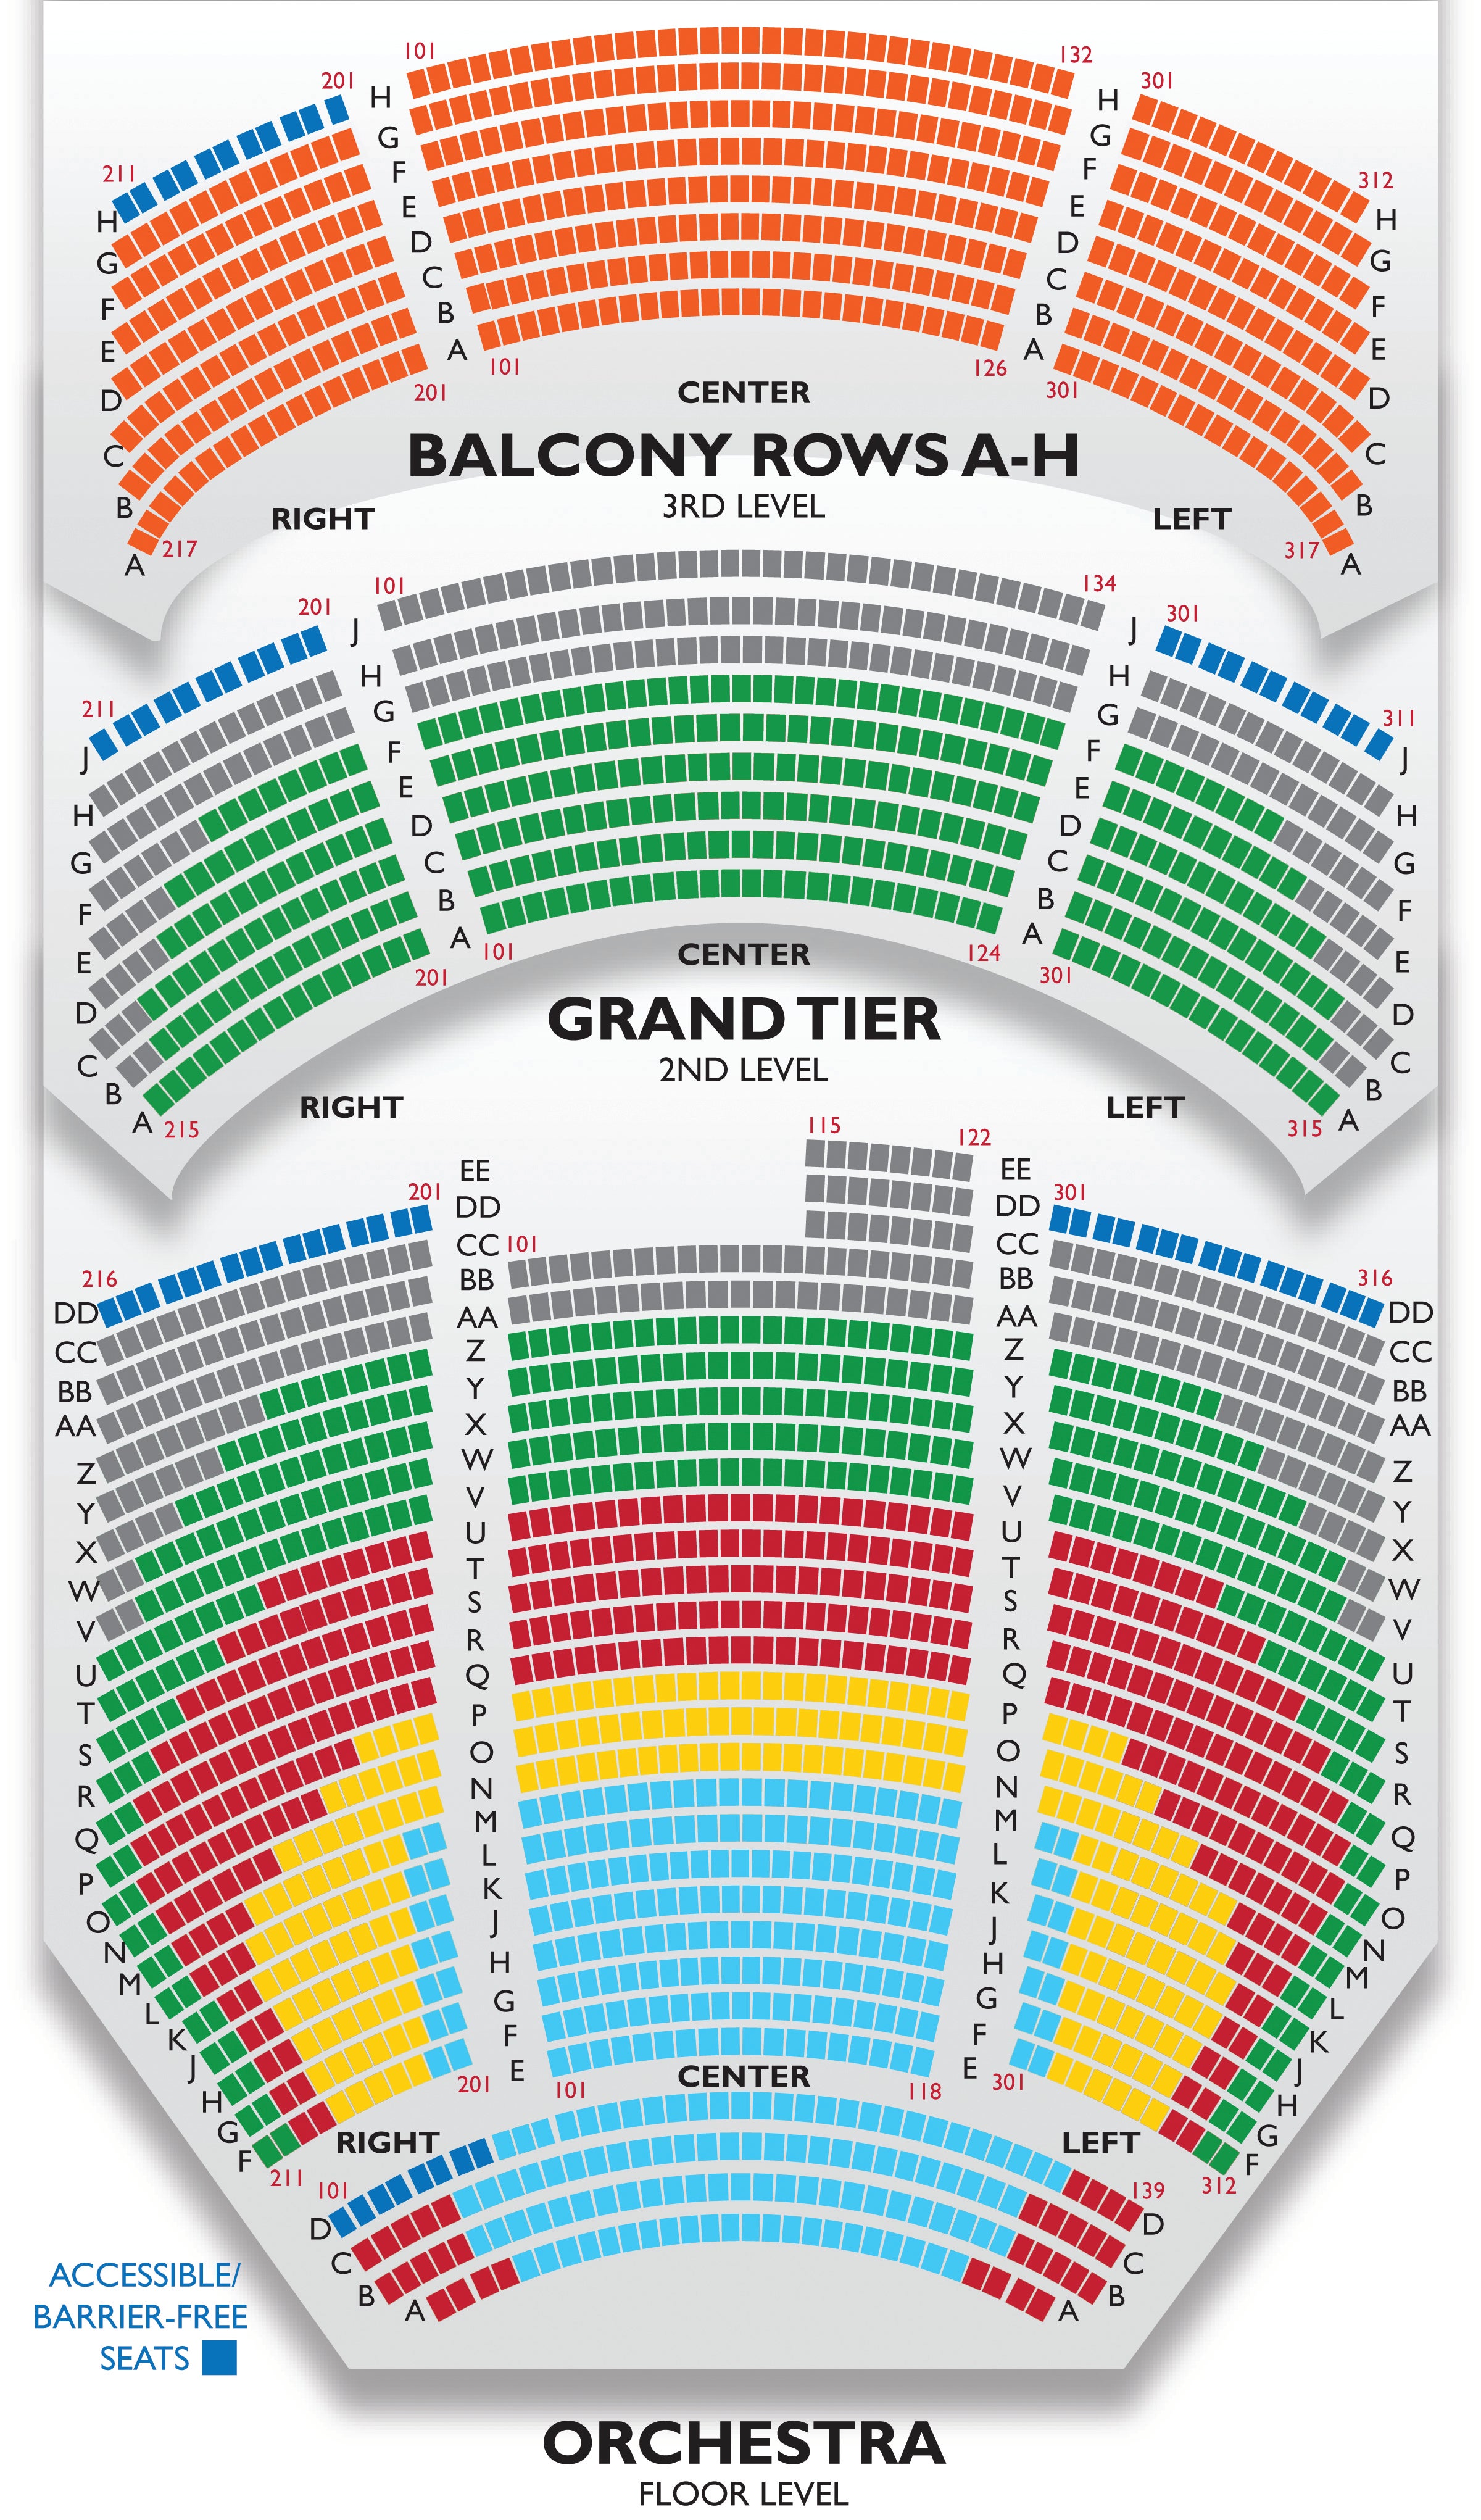 Lerner Theater Seating Chart